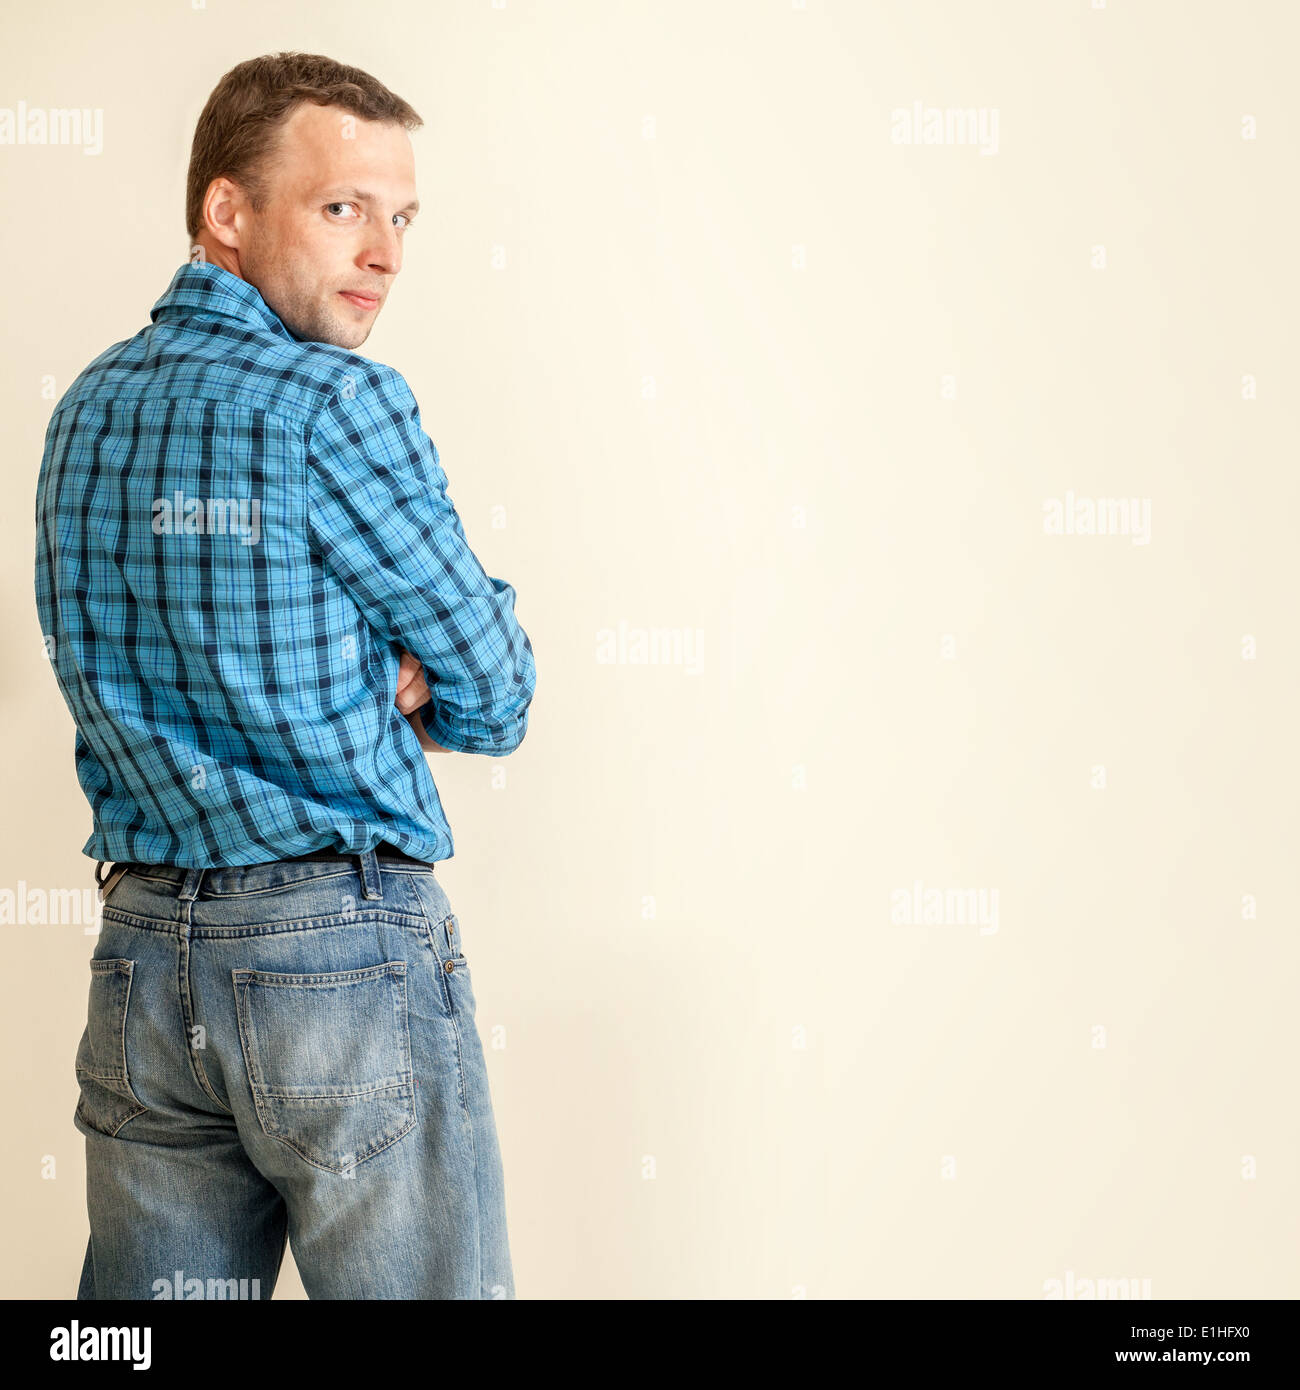 Young Caucasian man in blue shirt and jeans, studio portrait Stock Photo